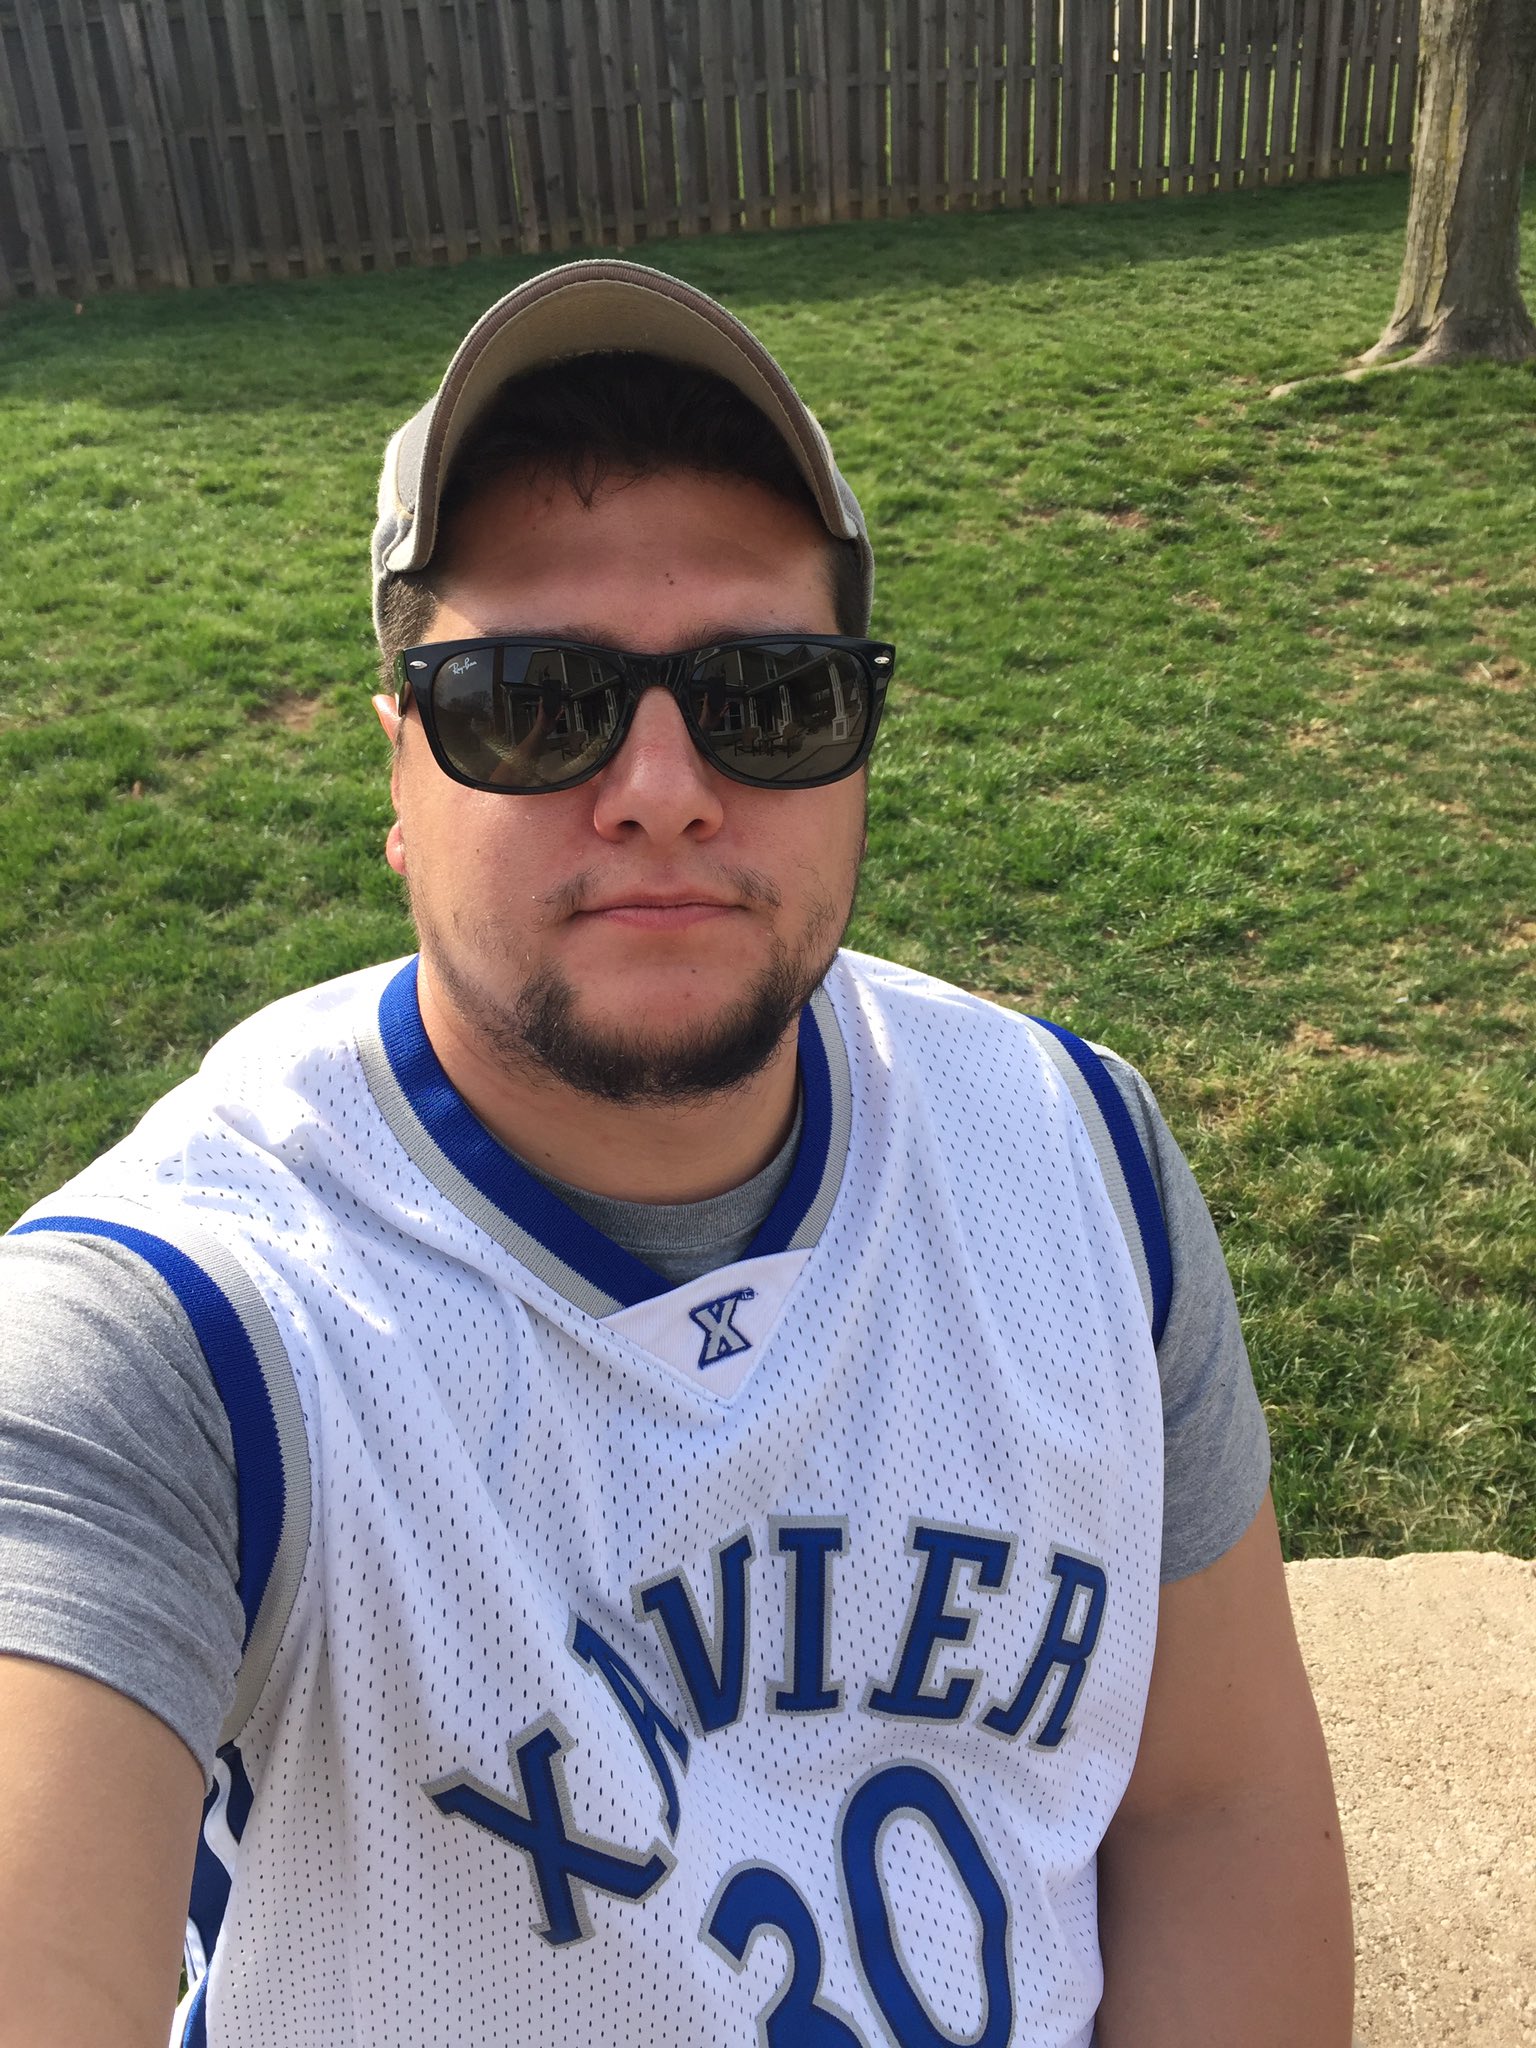 @XavierMBB enjoying the weather and getting anxious!!! Rocking that old school David West #LetsGoX https://t.co/8ftlwGDvNj